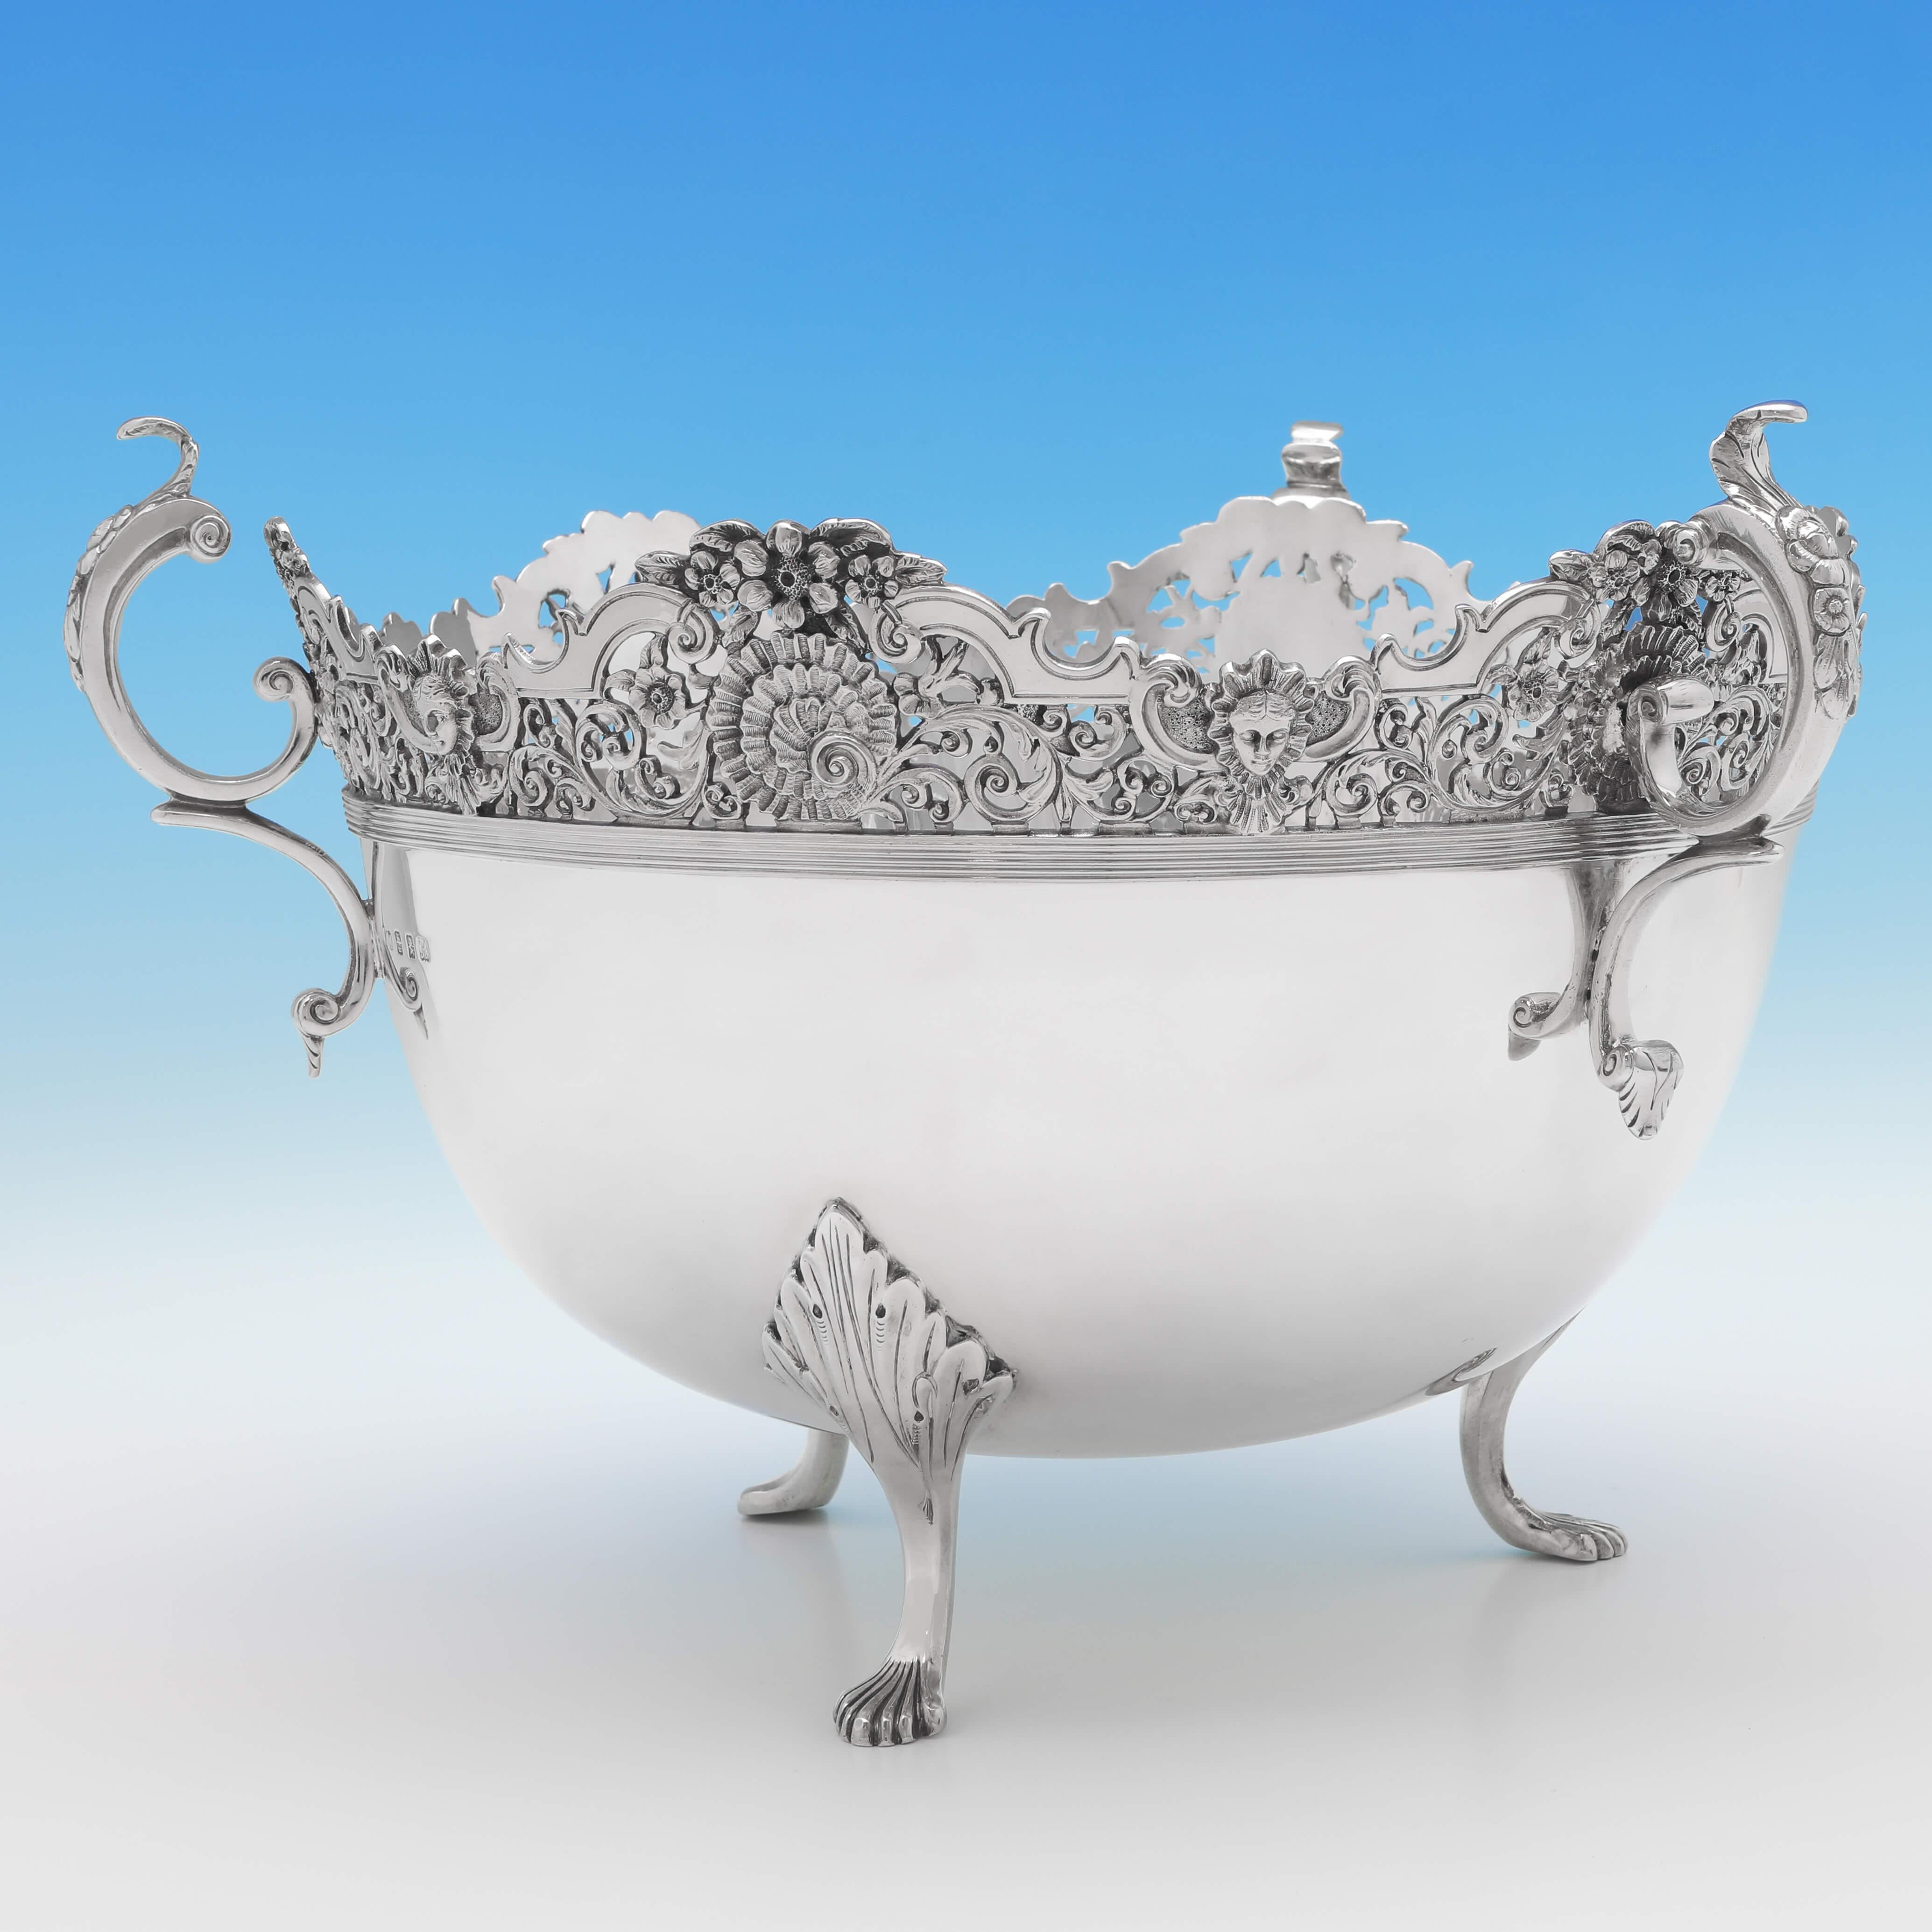 Hallmarked in Glasgow in 1907 by James Weir, this unusual, Edwardian, antique sterling silver bowl, stands on three feet, and features a cast pierced top, reed detailing and three acanthus decorated scroll handles. The bowl measures 9.25